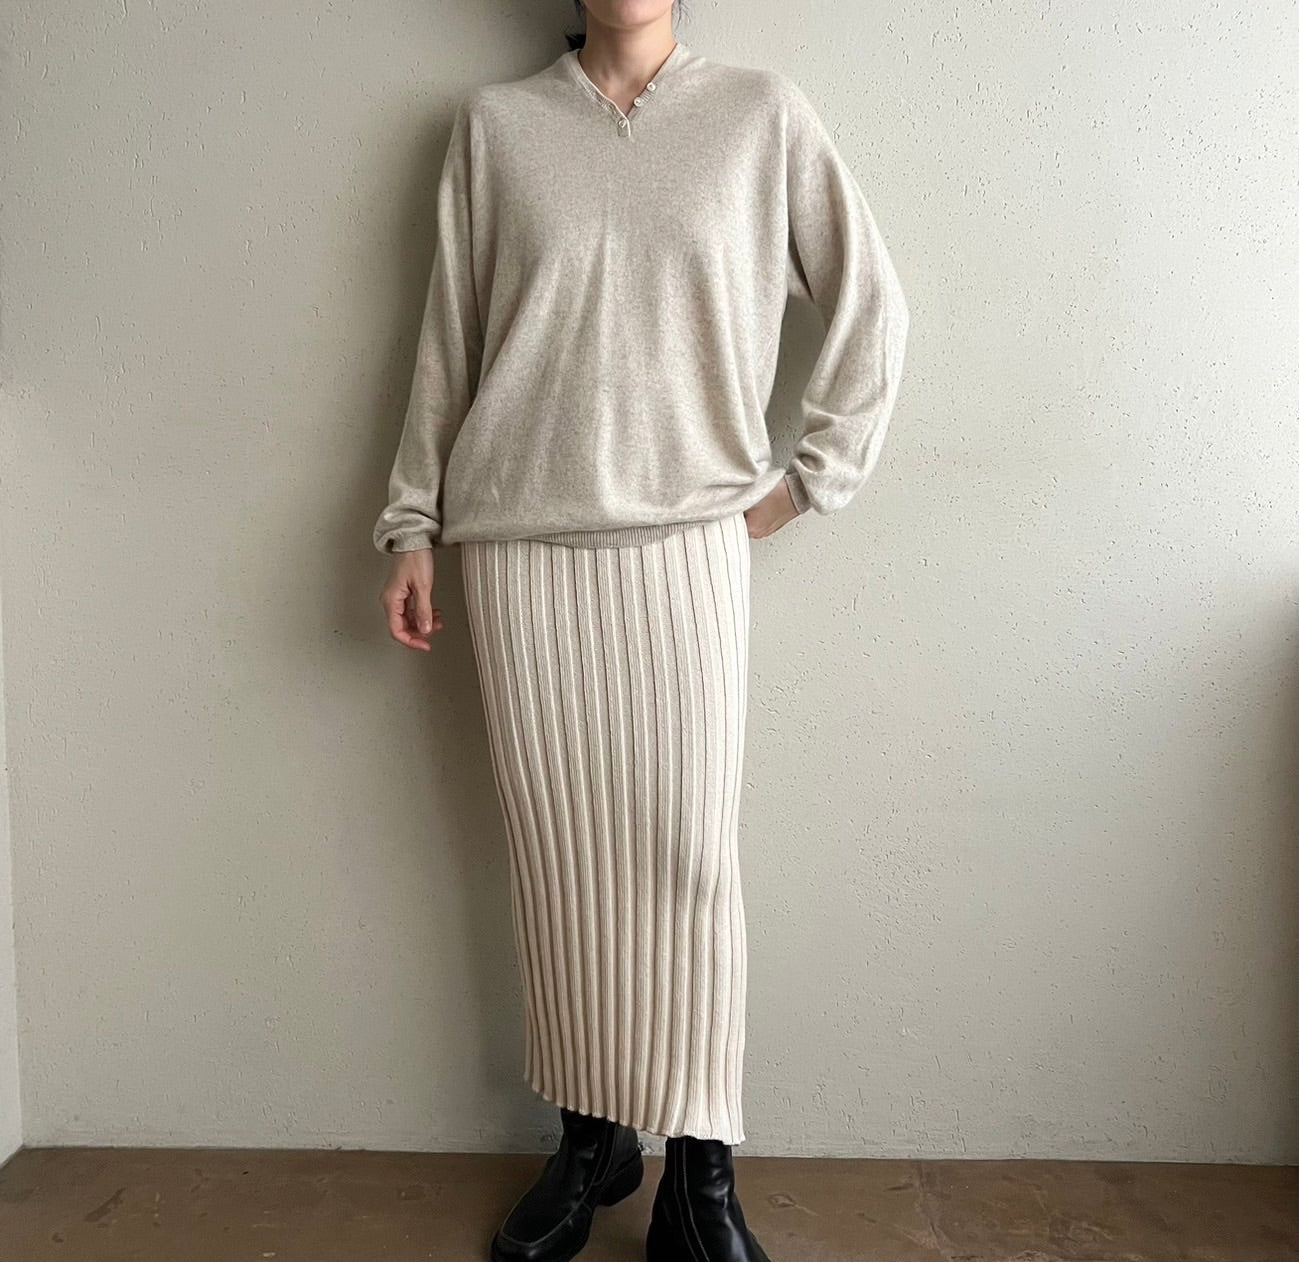 90s Cashmere Knit Top Made in Italy